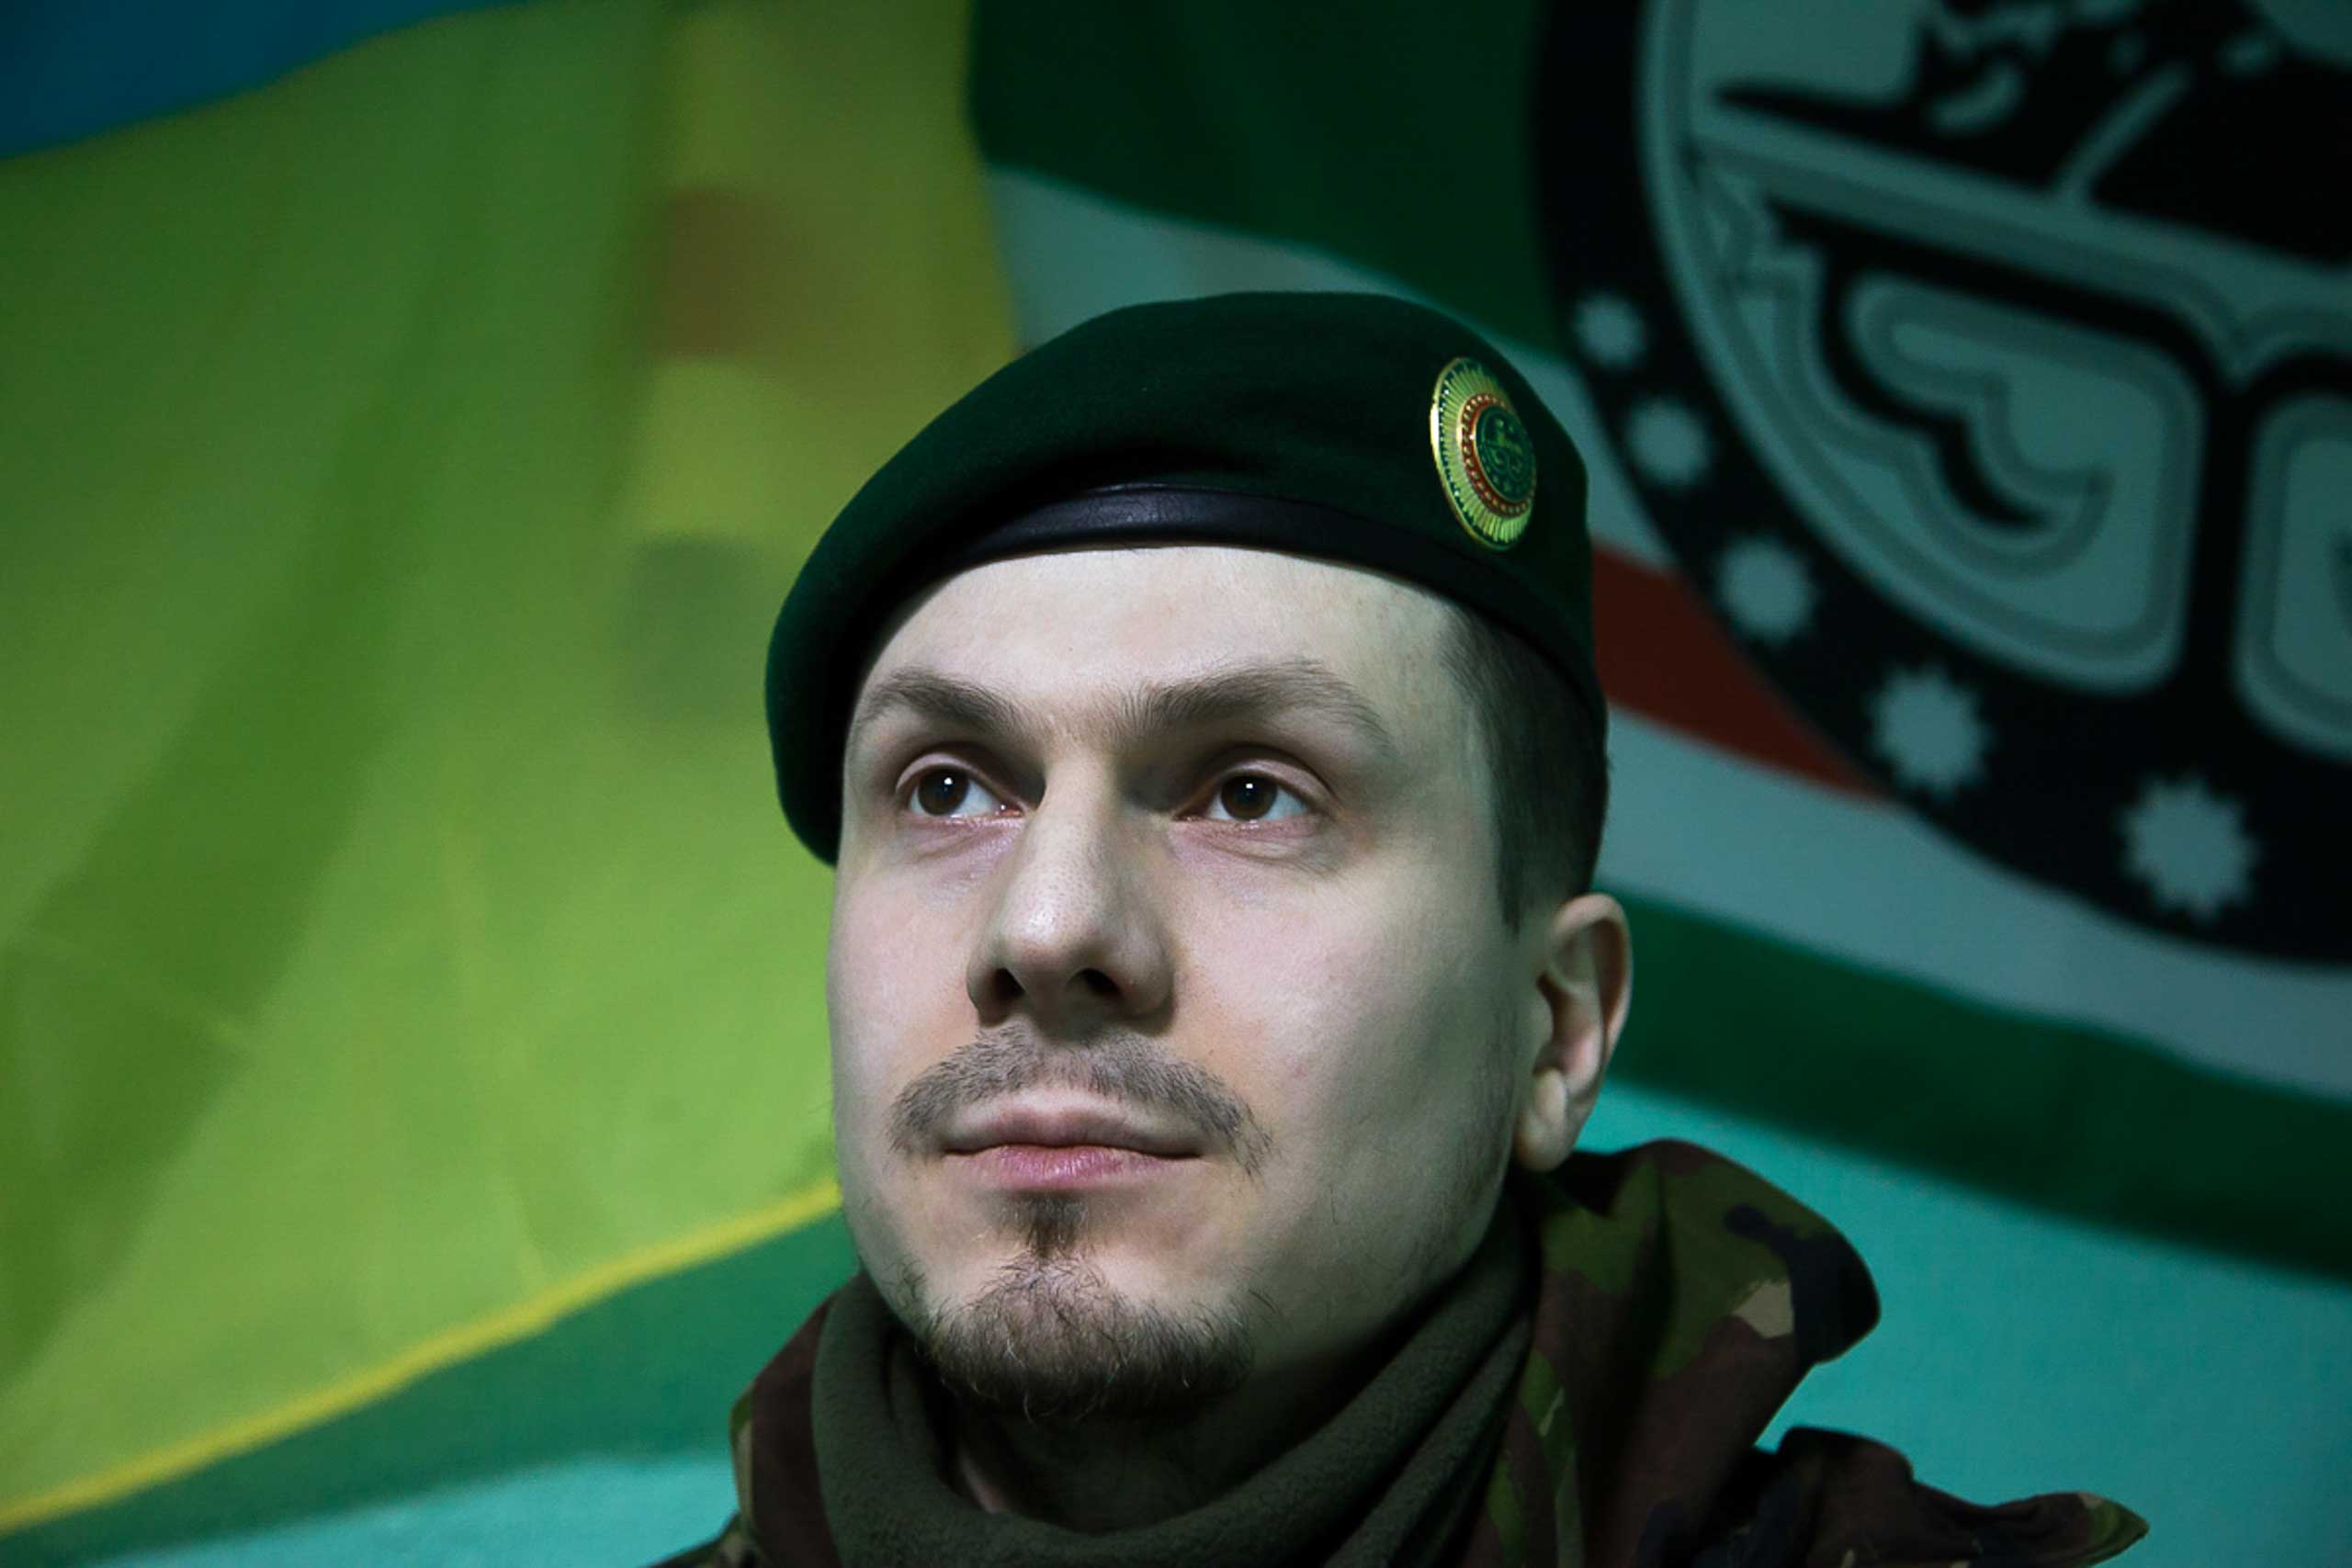 Adam Osmaev, the commander of a battalion of Chechens fighting against Russia-backed rebels, in Lysychansk, Ukraine on March 2, 2015. (Olya Engalycheva—AP)